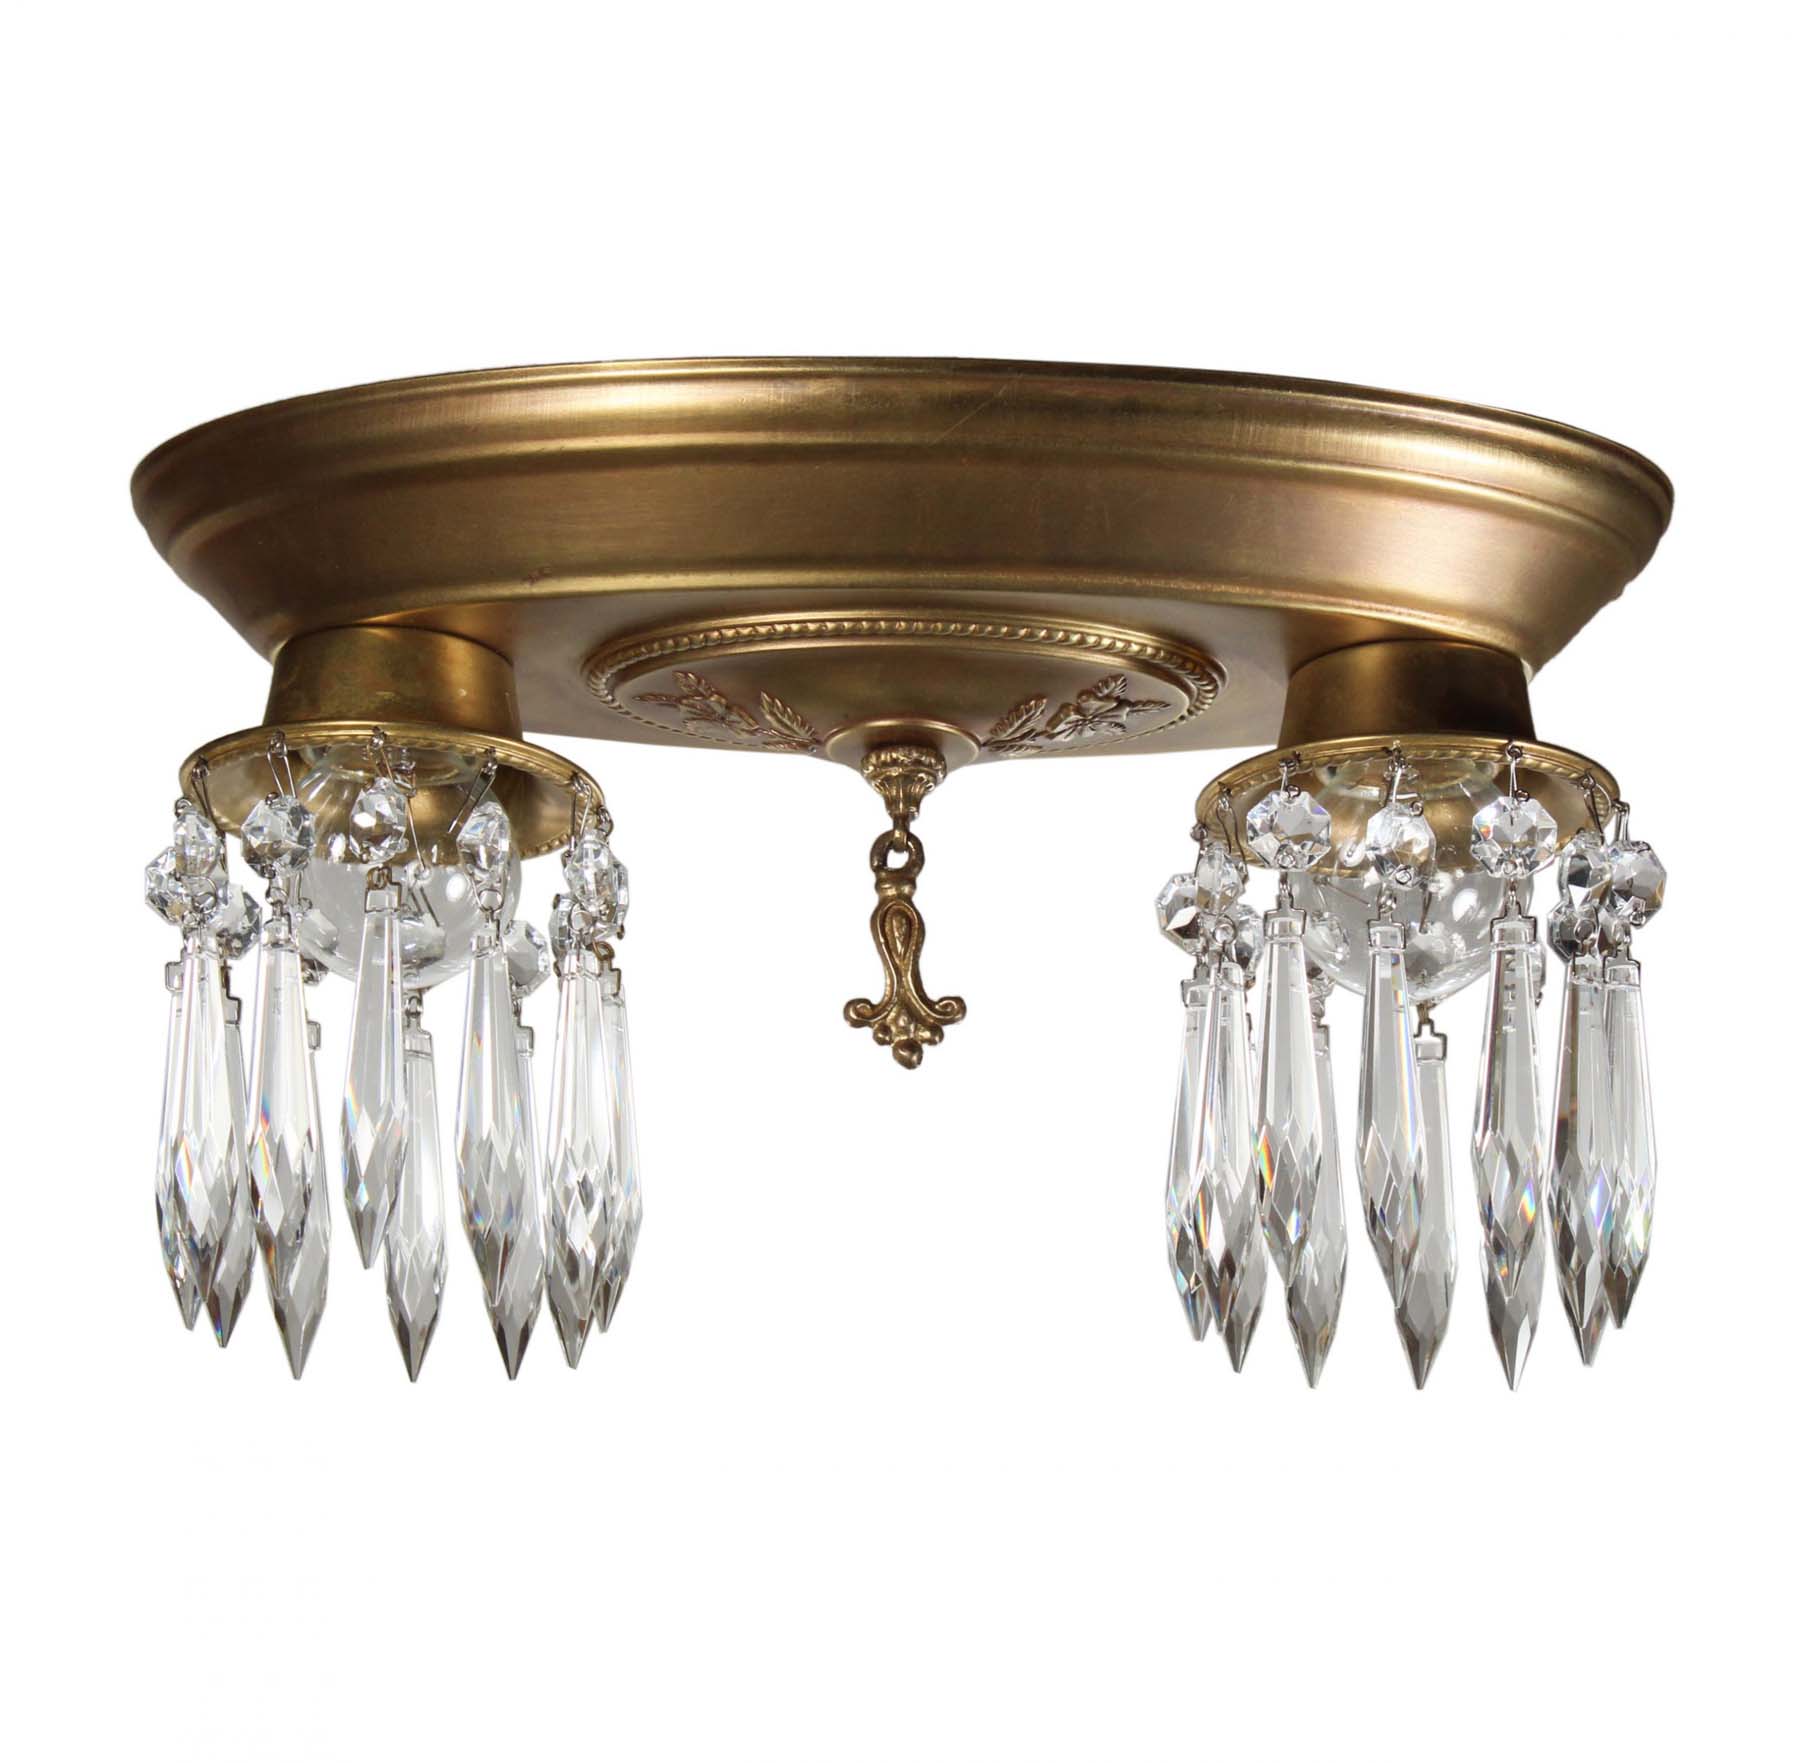 SOLD Antique Neoclassical Flush Mount Fixtures, Icicle Prisms-68405